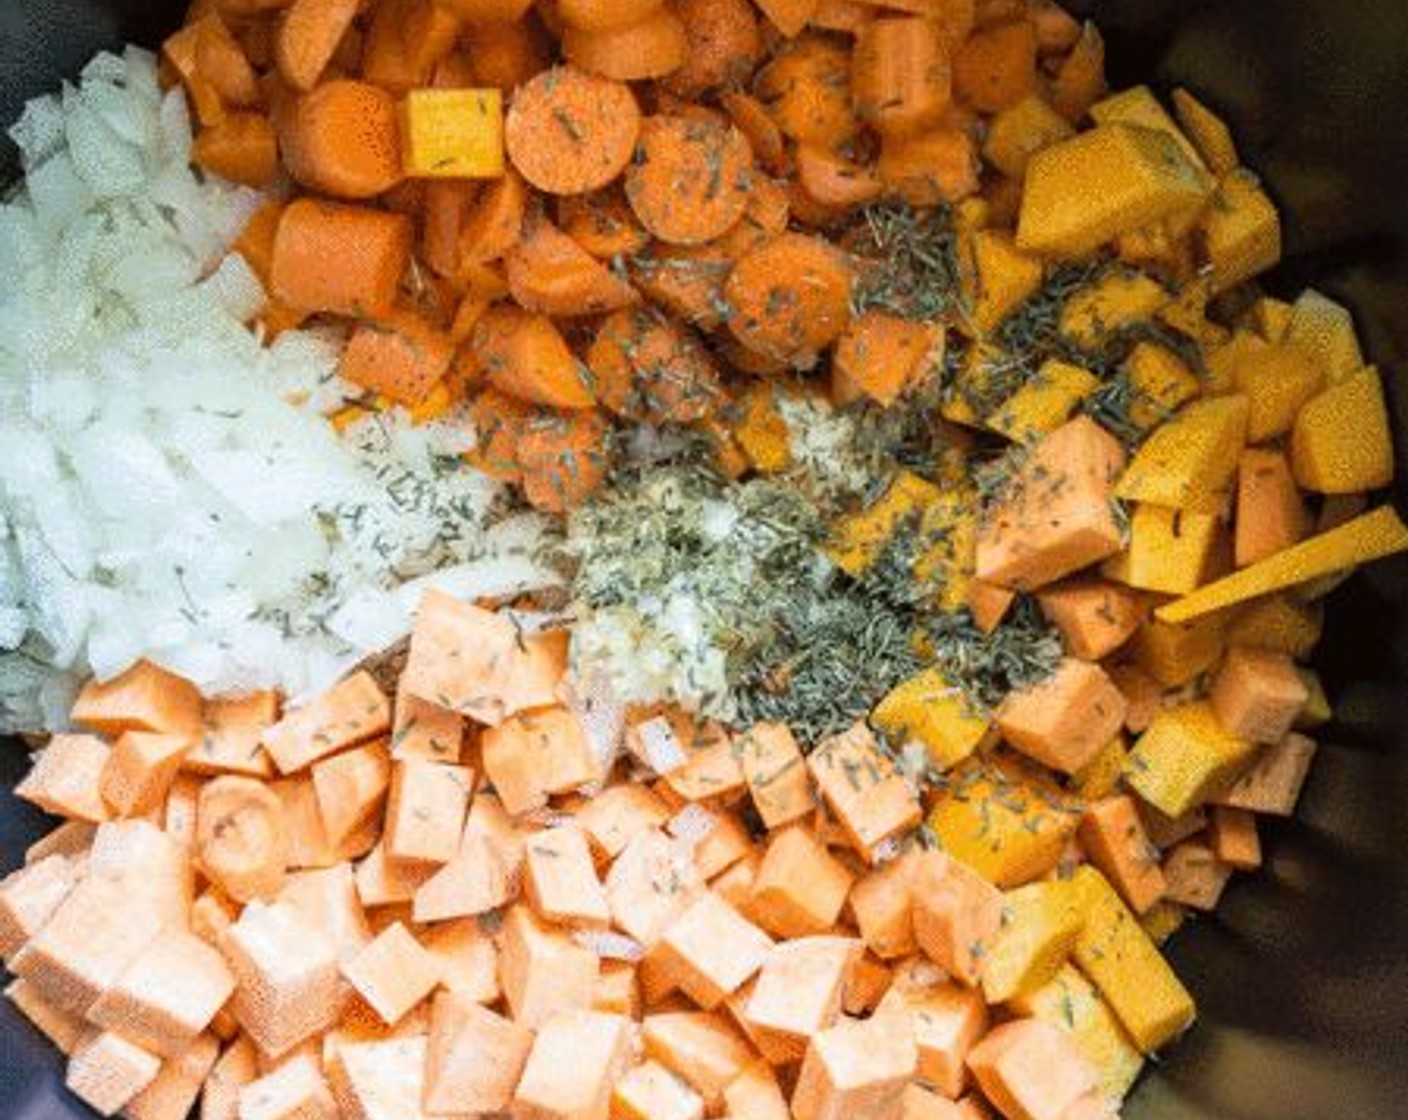 step 1 Add Vegetable Broth (9 cups), Sweet Potatoes (2 cups), Butternut Squash (2 cups), Carrots (2 cups), {@11:}, Green Peas (1 cup), Brown Lentils (3/4 cup), {@10:}, Dried Rosemary (1 tsp), Dried Thyme (1 tsp), Dried Oregano (1/2 tsp), and Sea Salt (1 tsp) to your Instant Pot.